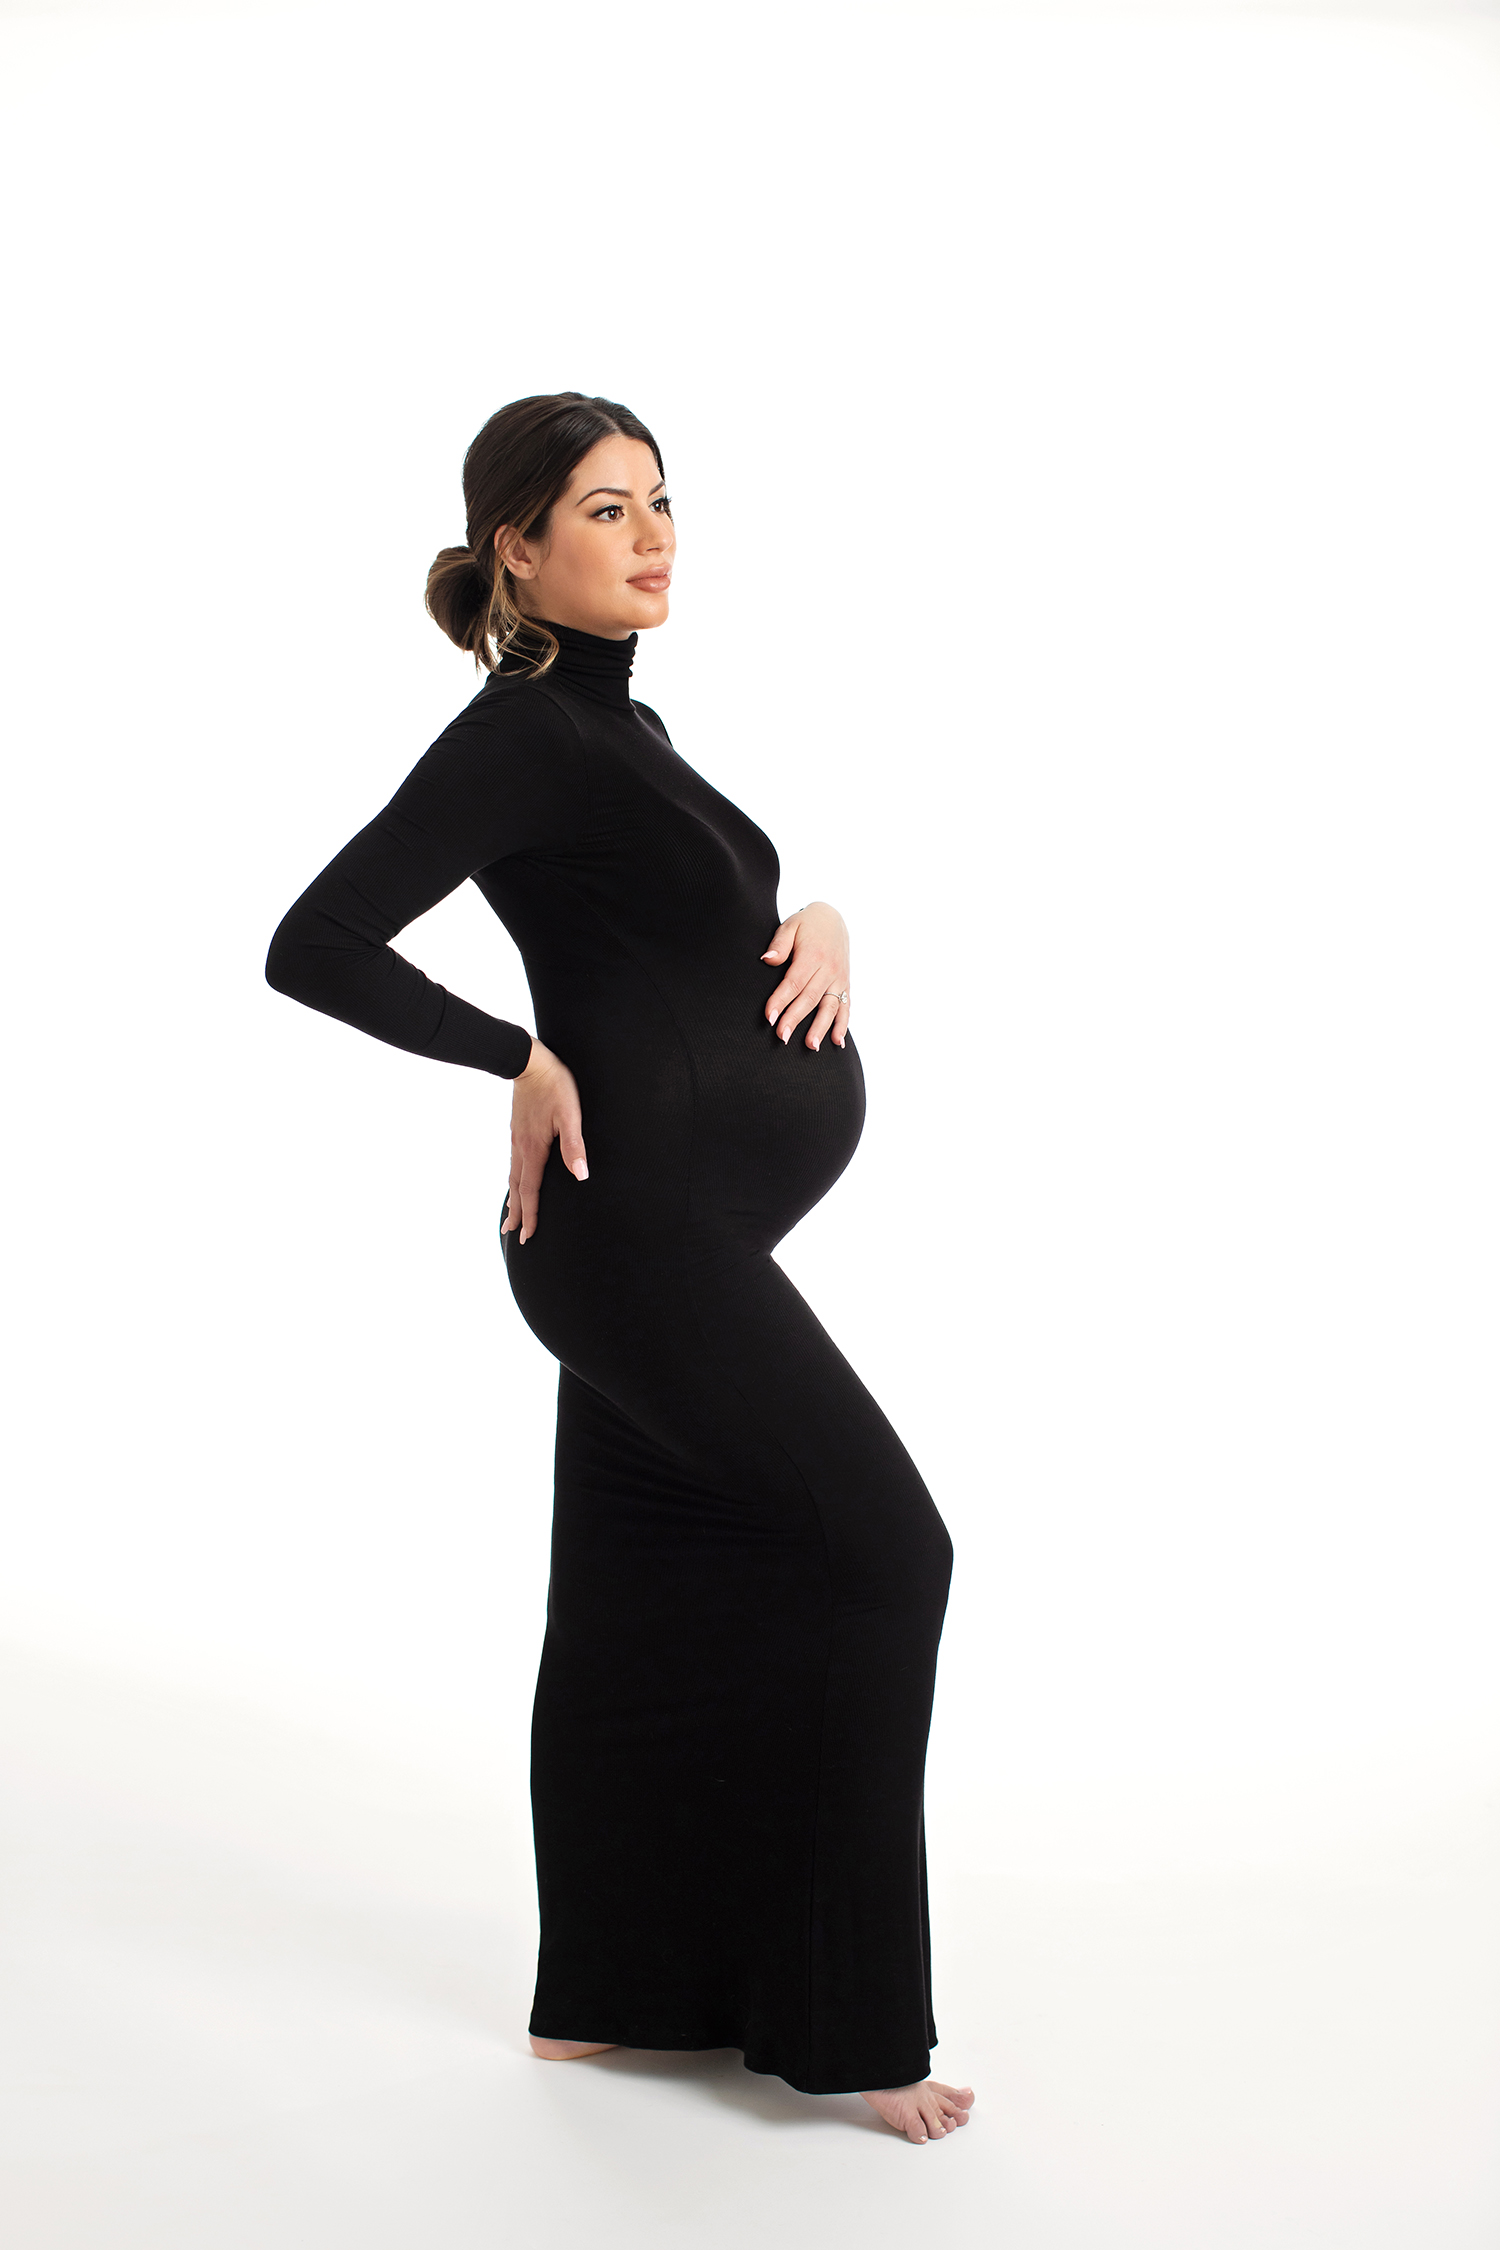 A confident woman rocks a bold black outfit in a maternity photoshoot